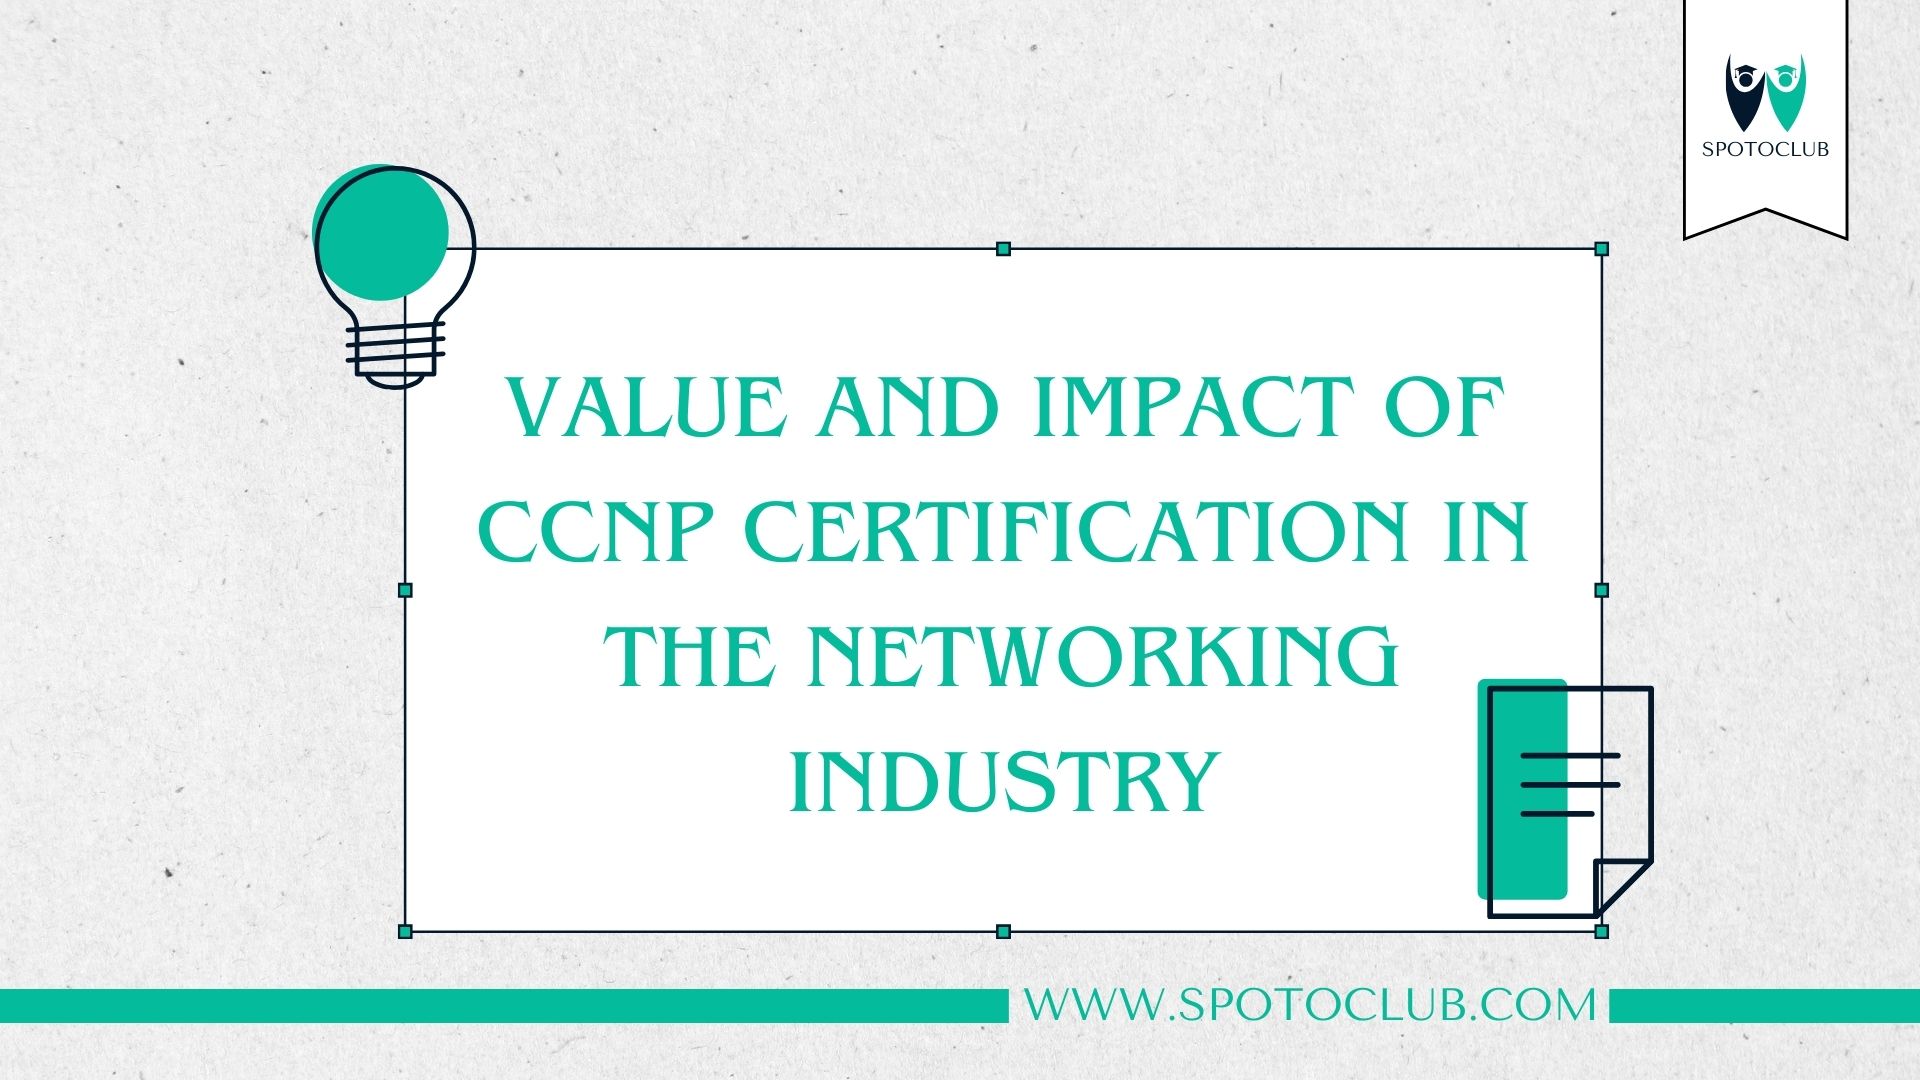 Value and Impact of CCNP Certification in the Networking Industry